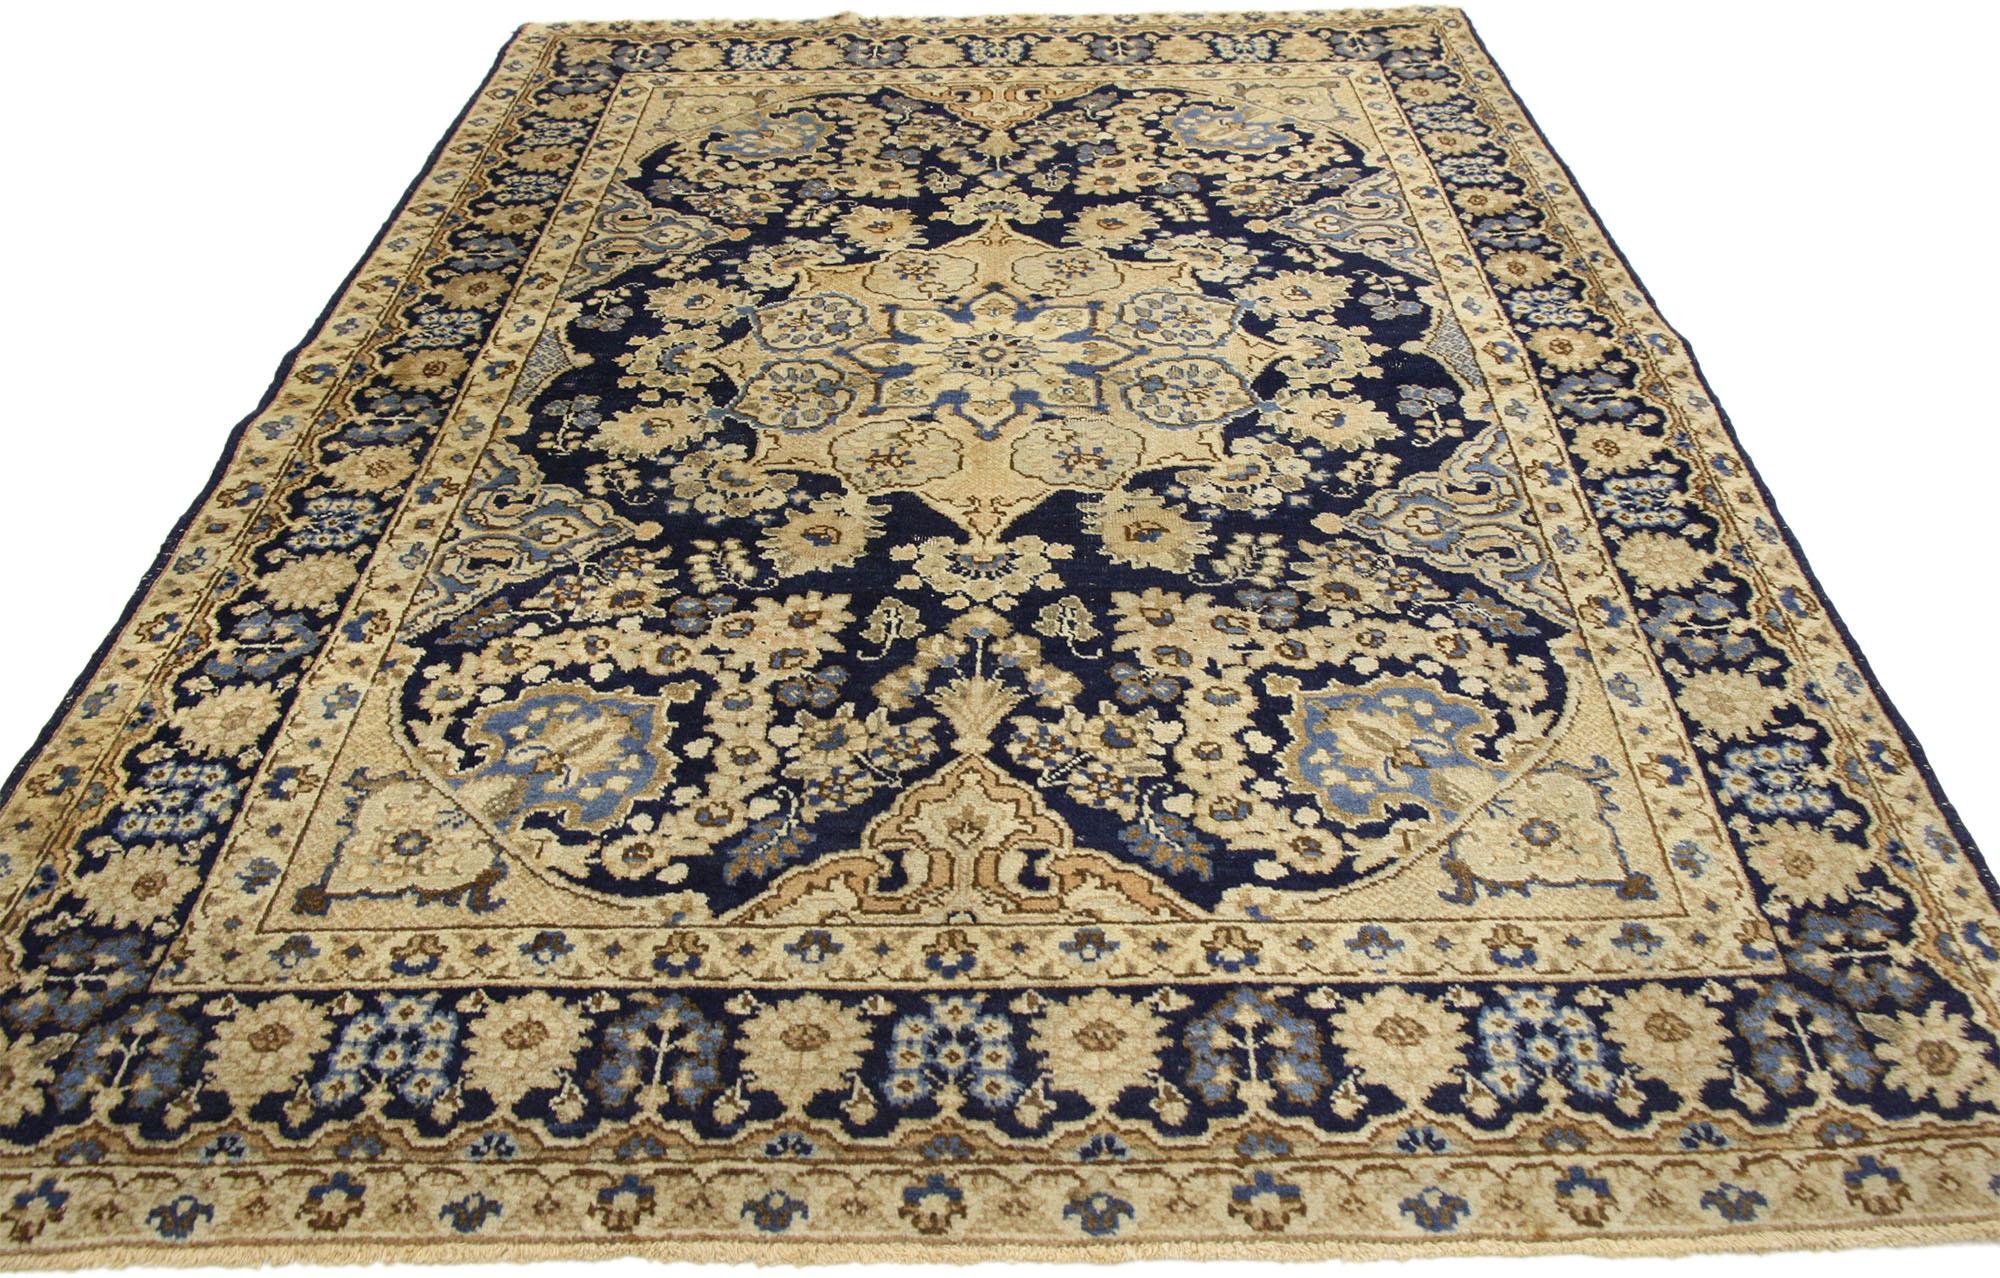 Antique Persian Tabriz Rug with Hollywood Regency Style In Good Condition For Sale In Dallas, TX